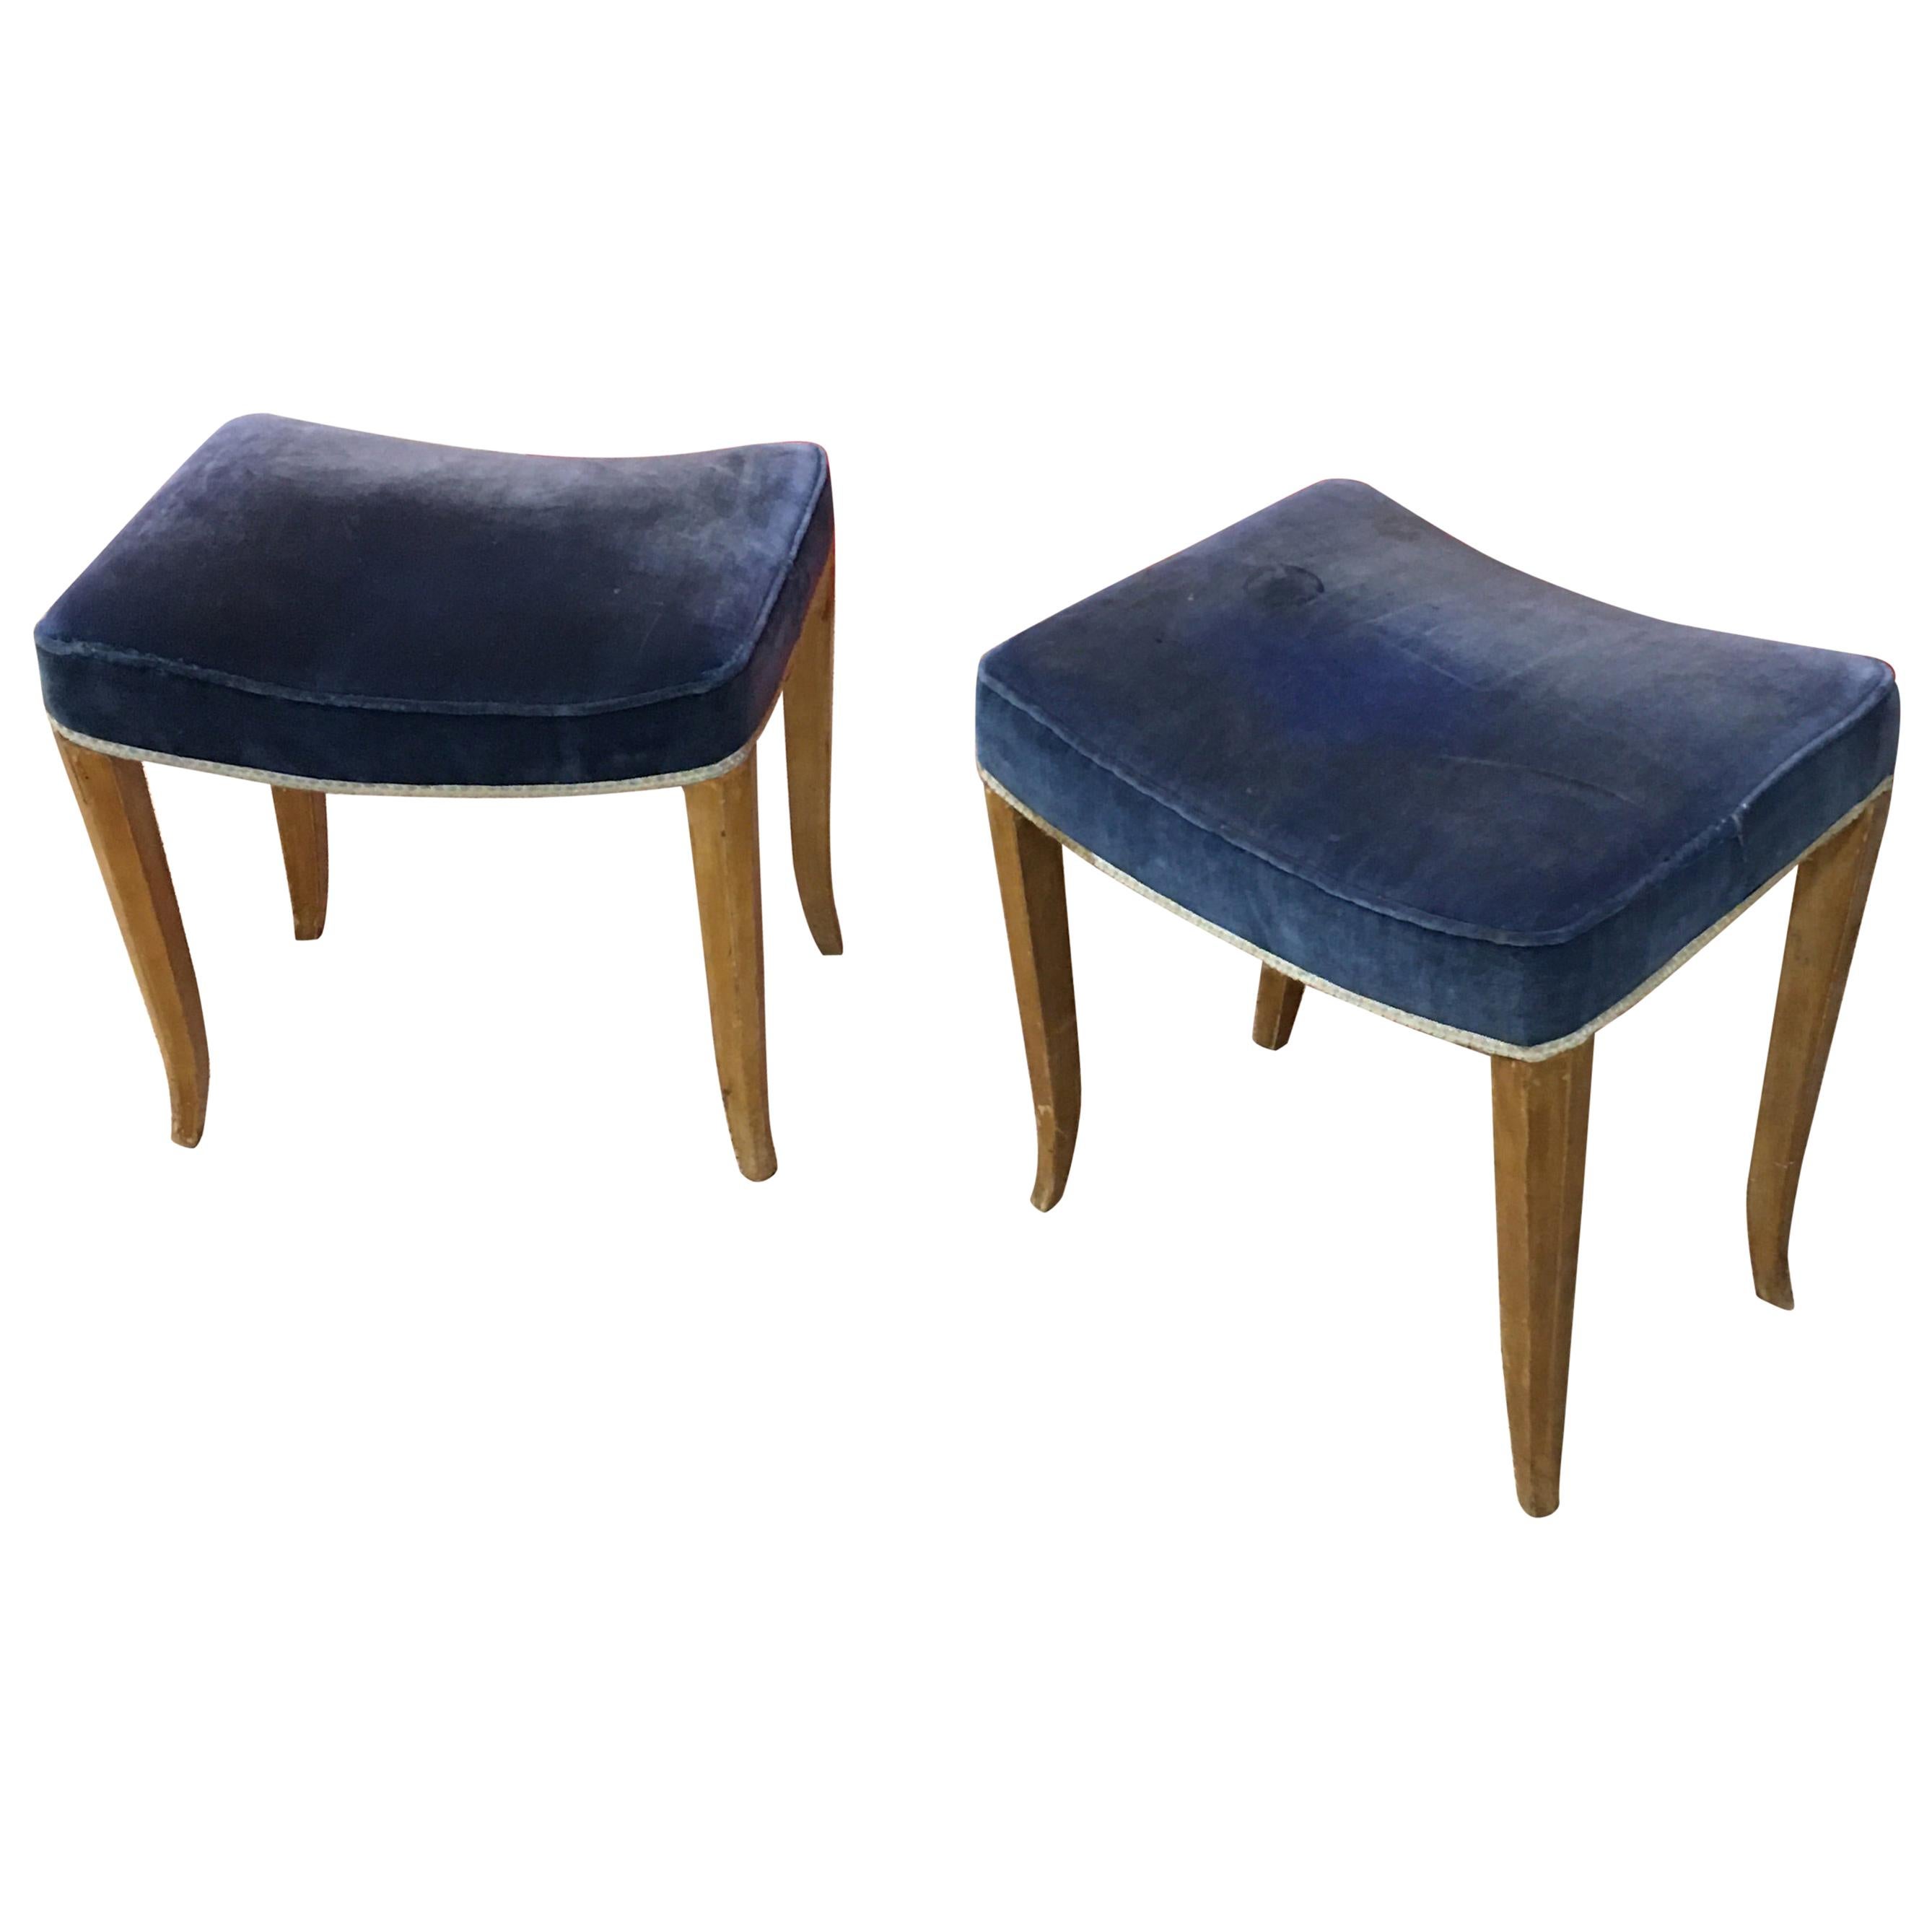 René Prou, 2 Art Deco Stools in Lacquered Wood and Blue Velvet, circa 1940-1950